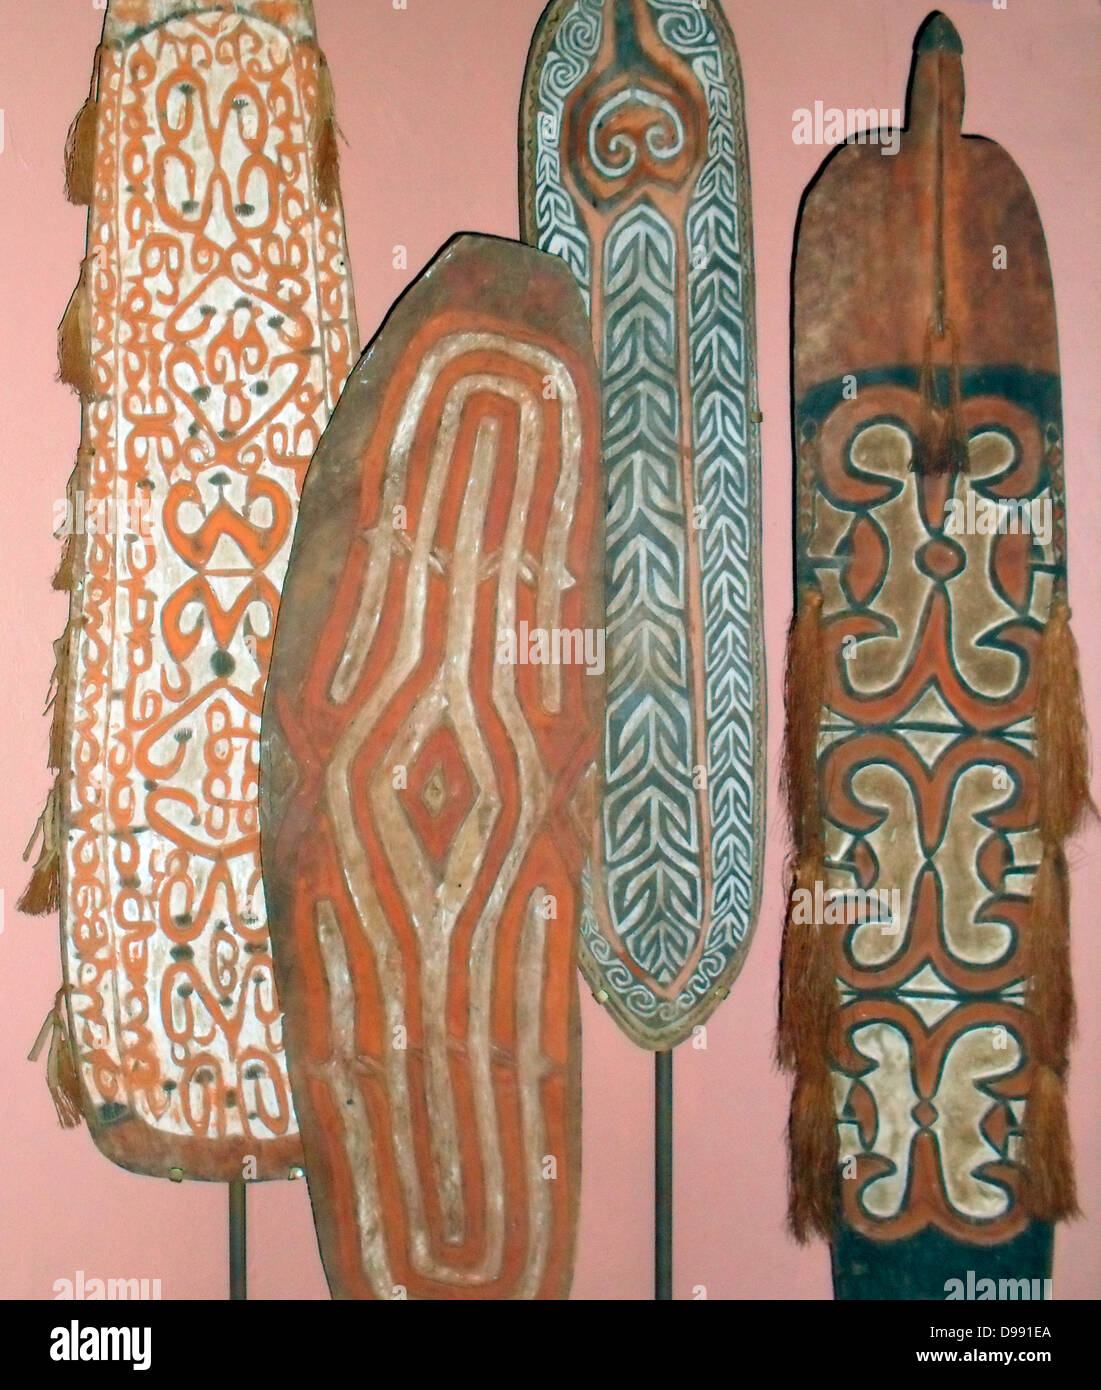 Shields made from wood from various tribal cultures in Merauke, Paua New Guinea. early 20th Century. Stock Photo